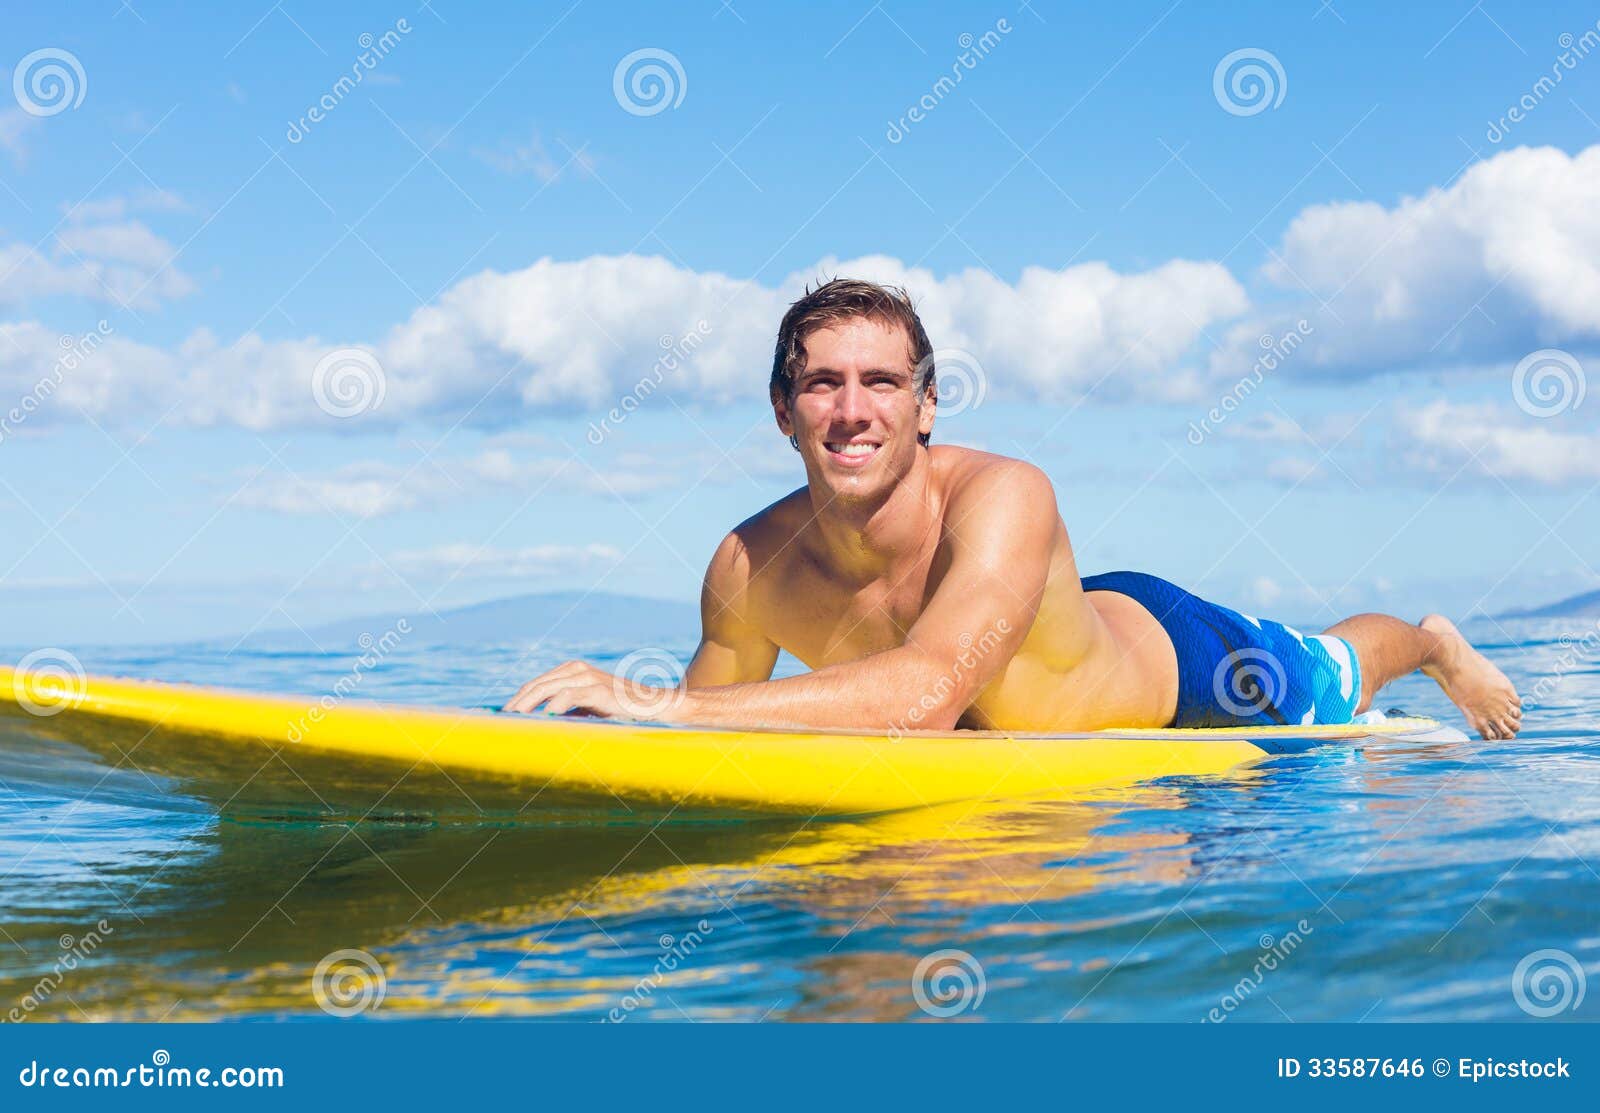 Man on Stand Up Paddle Board Stock Photo - Image of paddle, nature ...